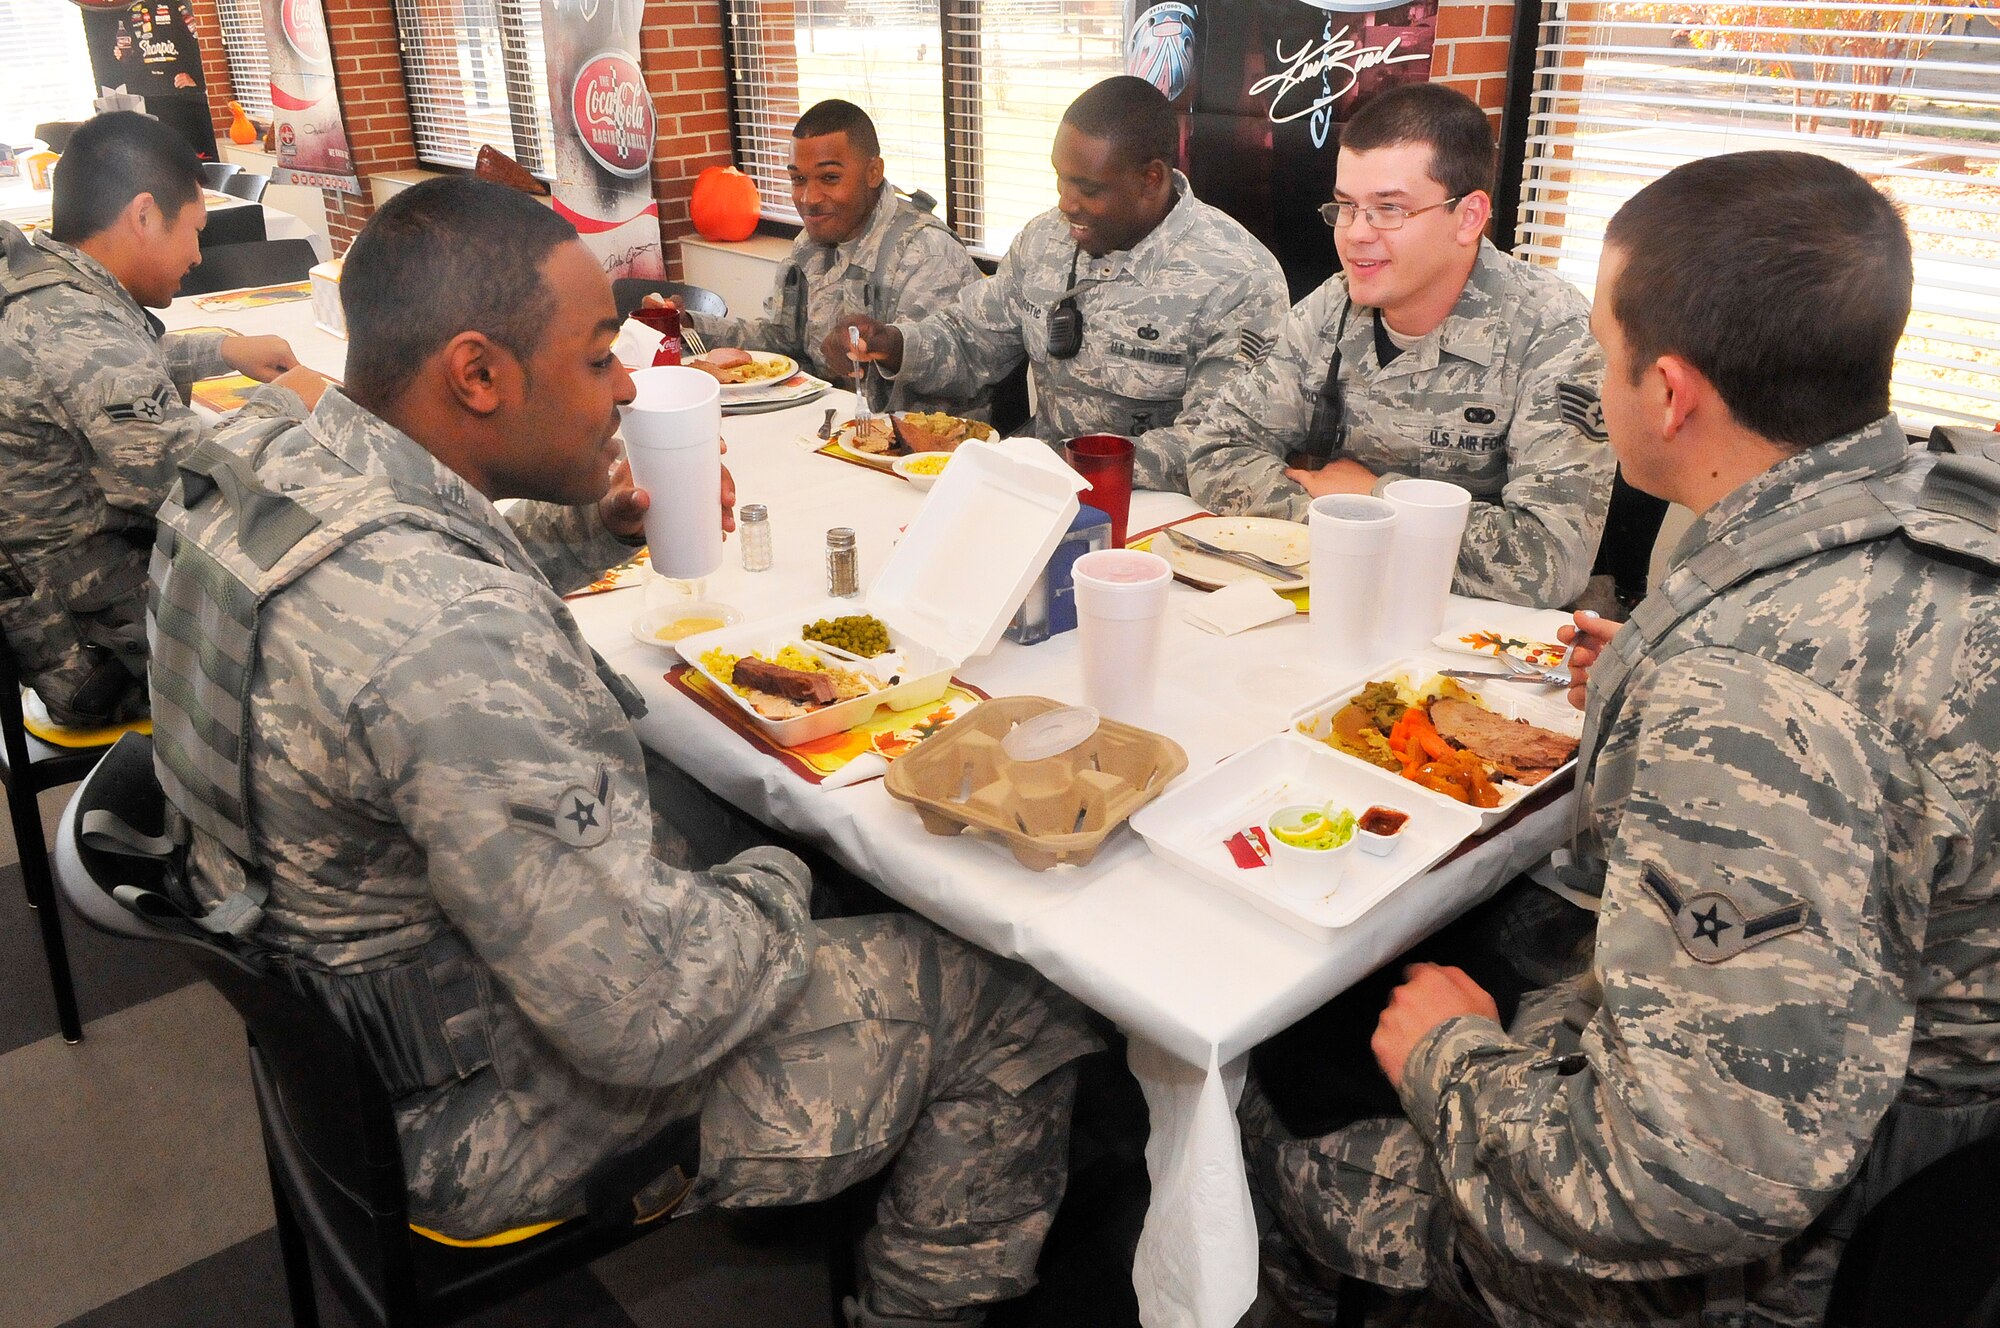 Airmen with the 78th Air Base Wing Security Forces Squadron take a break to enjoy some food and fellowship during the Thanksgiving meal at Wynn Dining facility.  (U. S. Air Force photo/Sue Sapp)